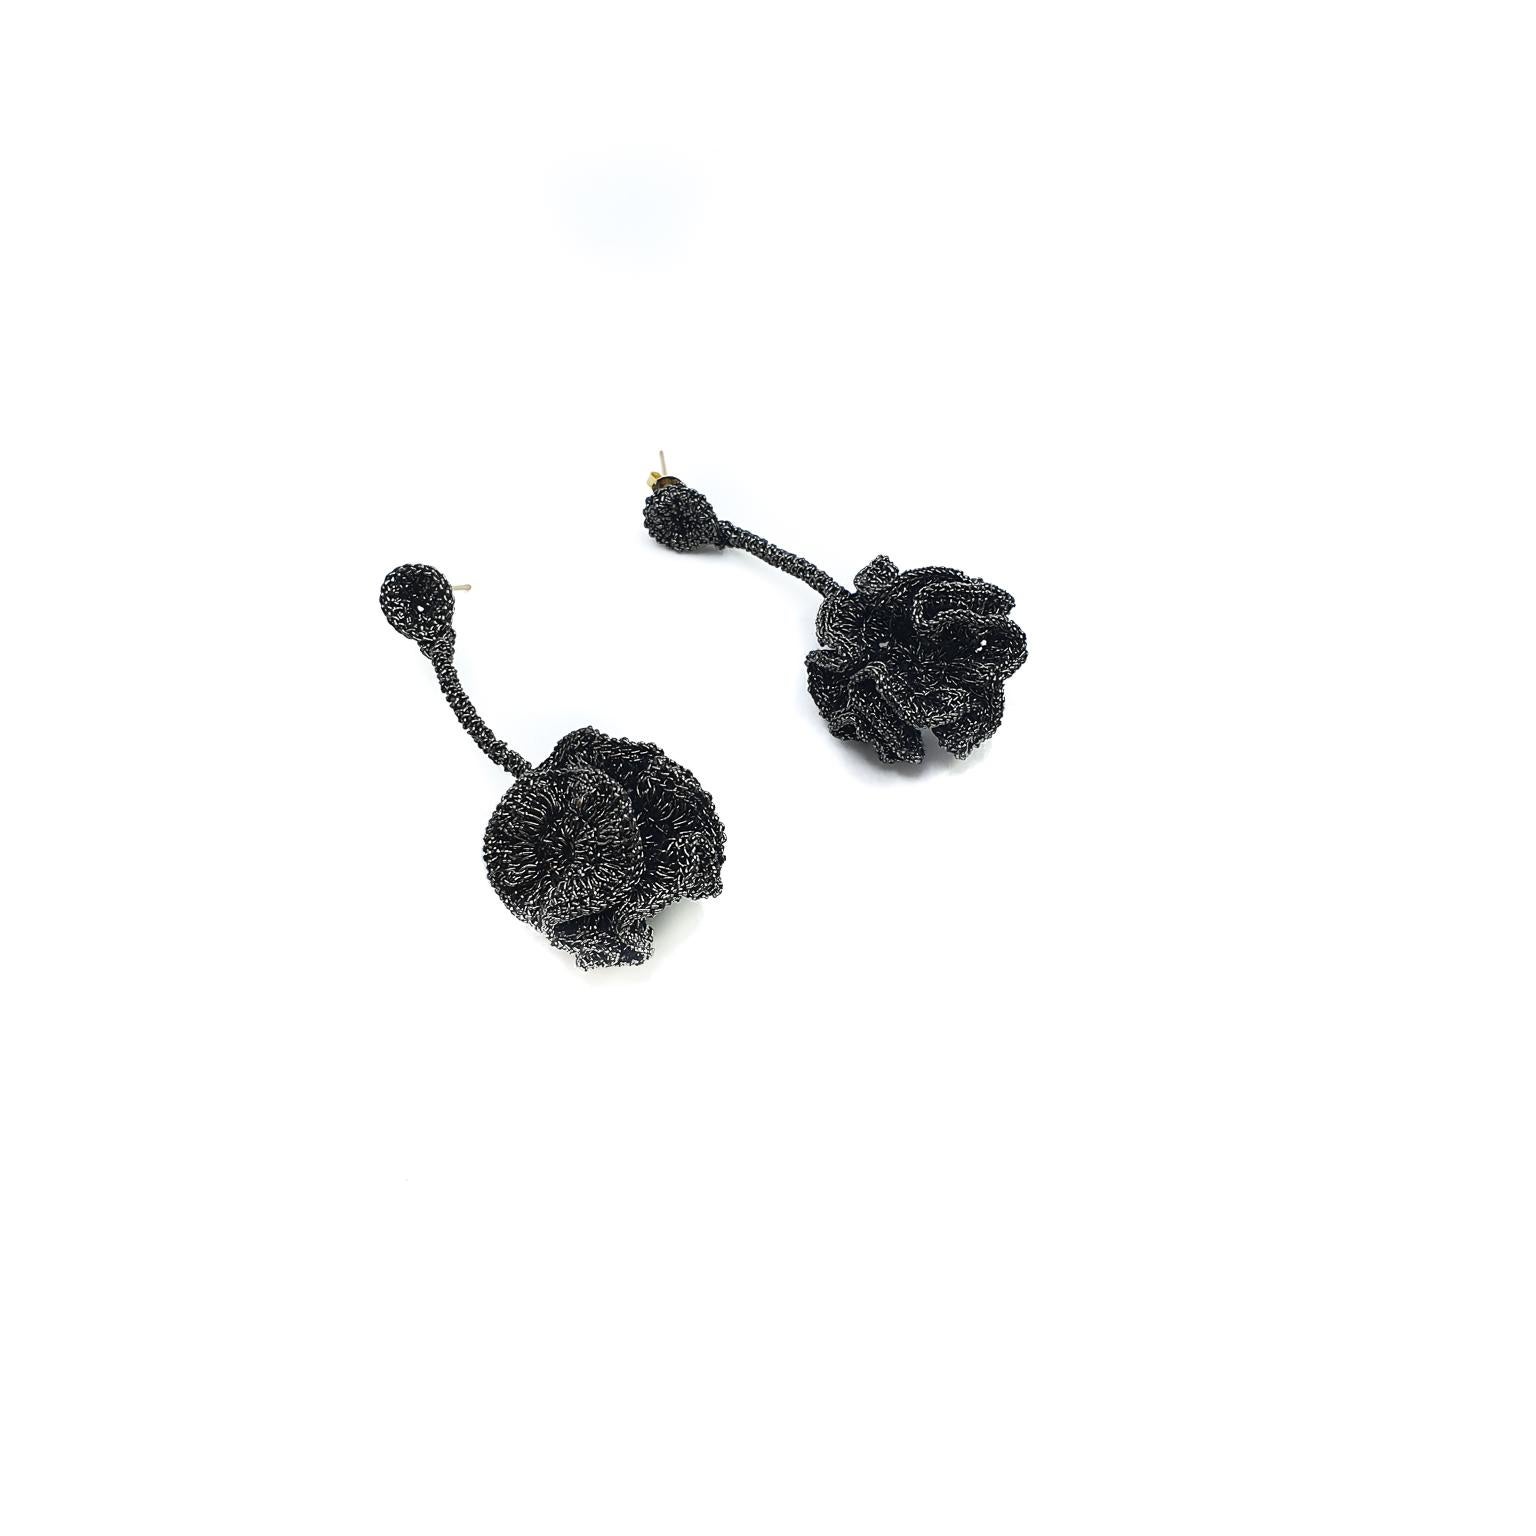 These are beautiful free form black thread coral crochet earrings.

The earrings can be custom made.

The earrings are  crochet with a smooth passing thread. It is a cotton thread coated with a black color polymer. It has no metal content. The